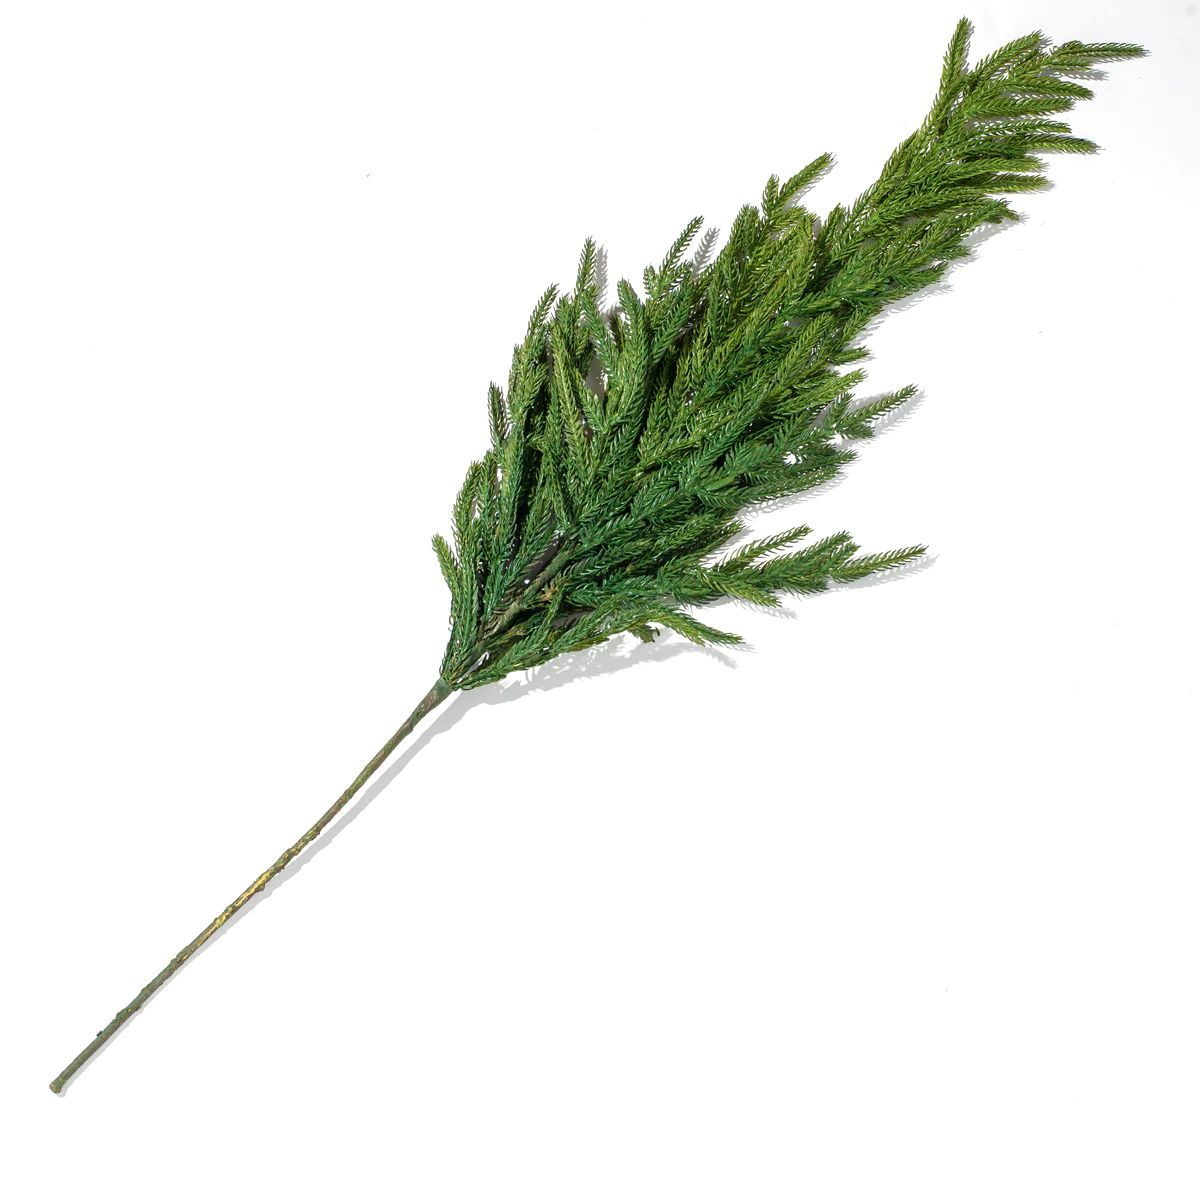 Real Touch Green Norfolk Pine Branch Christmas Spray - 38" | Darby Creek Trading